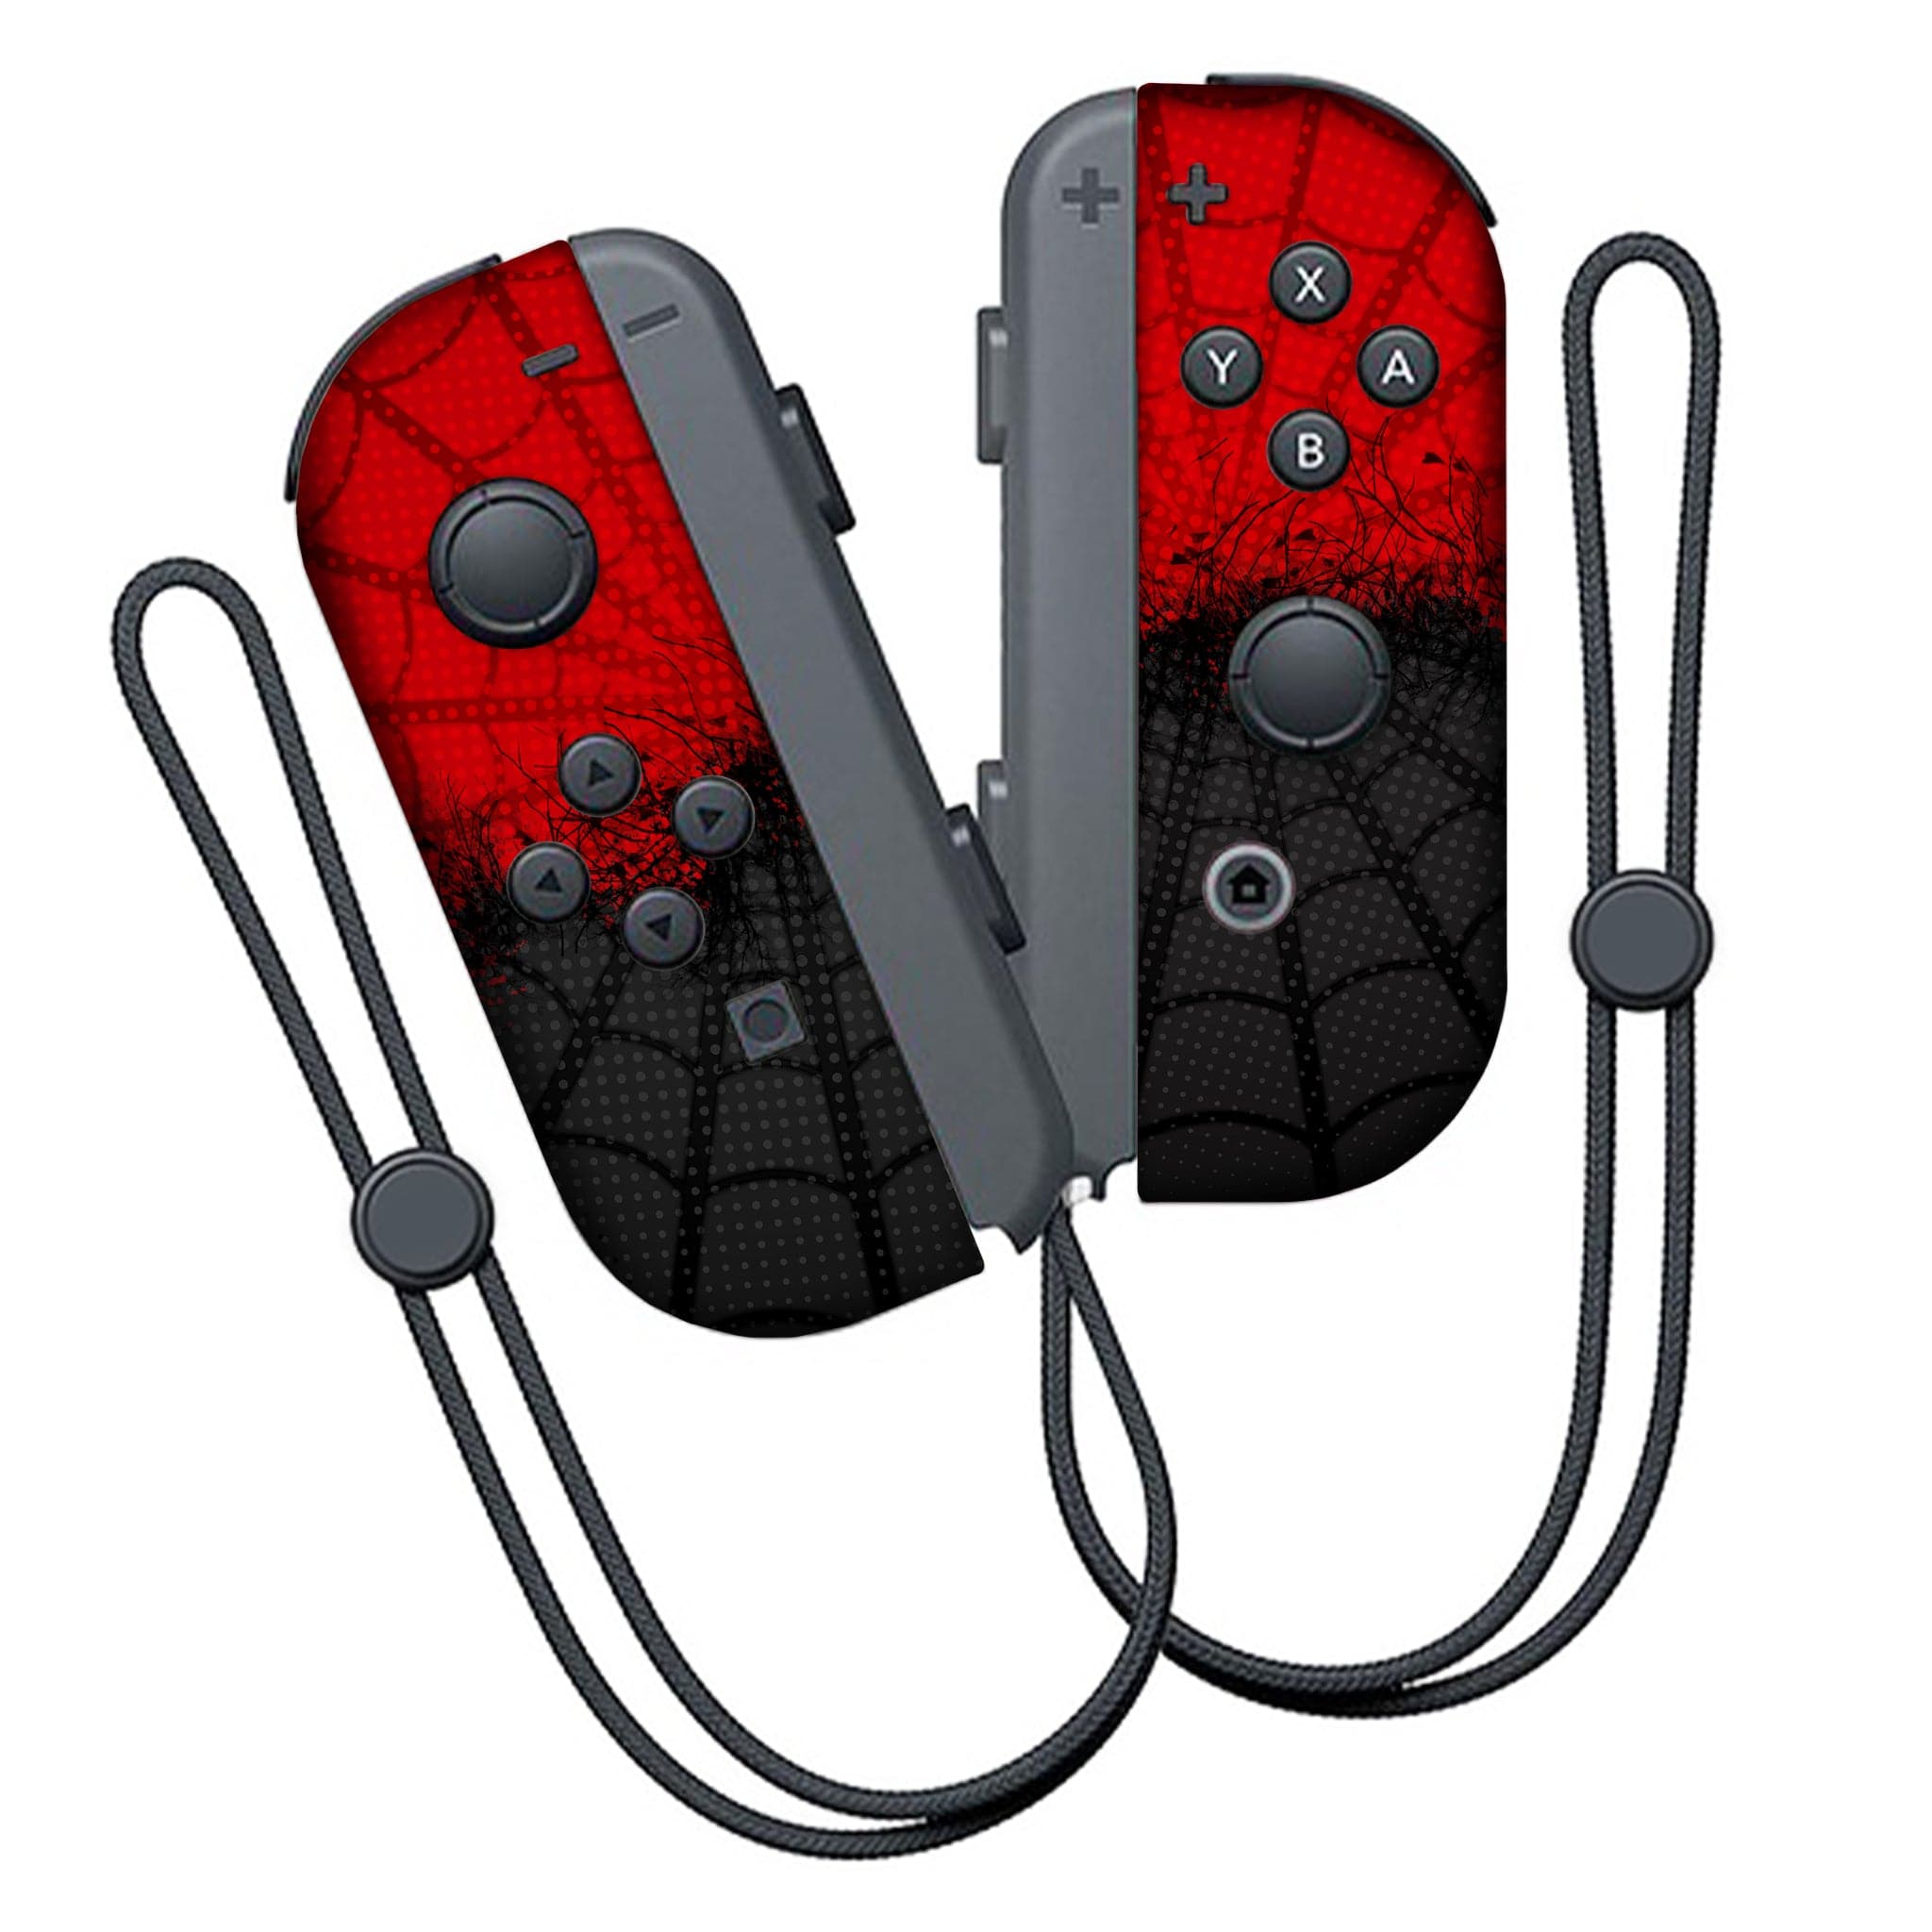 Black Spiderman inspired Nintendo Switch Joy-Con Left and Right Controllers